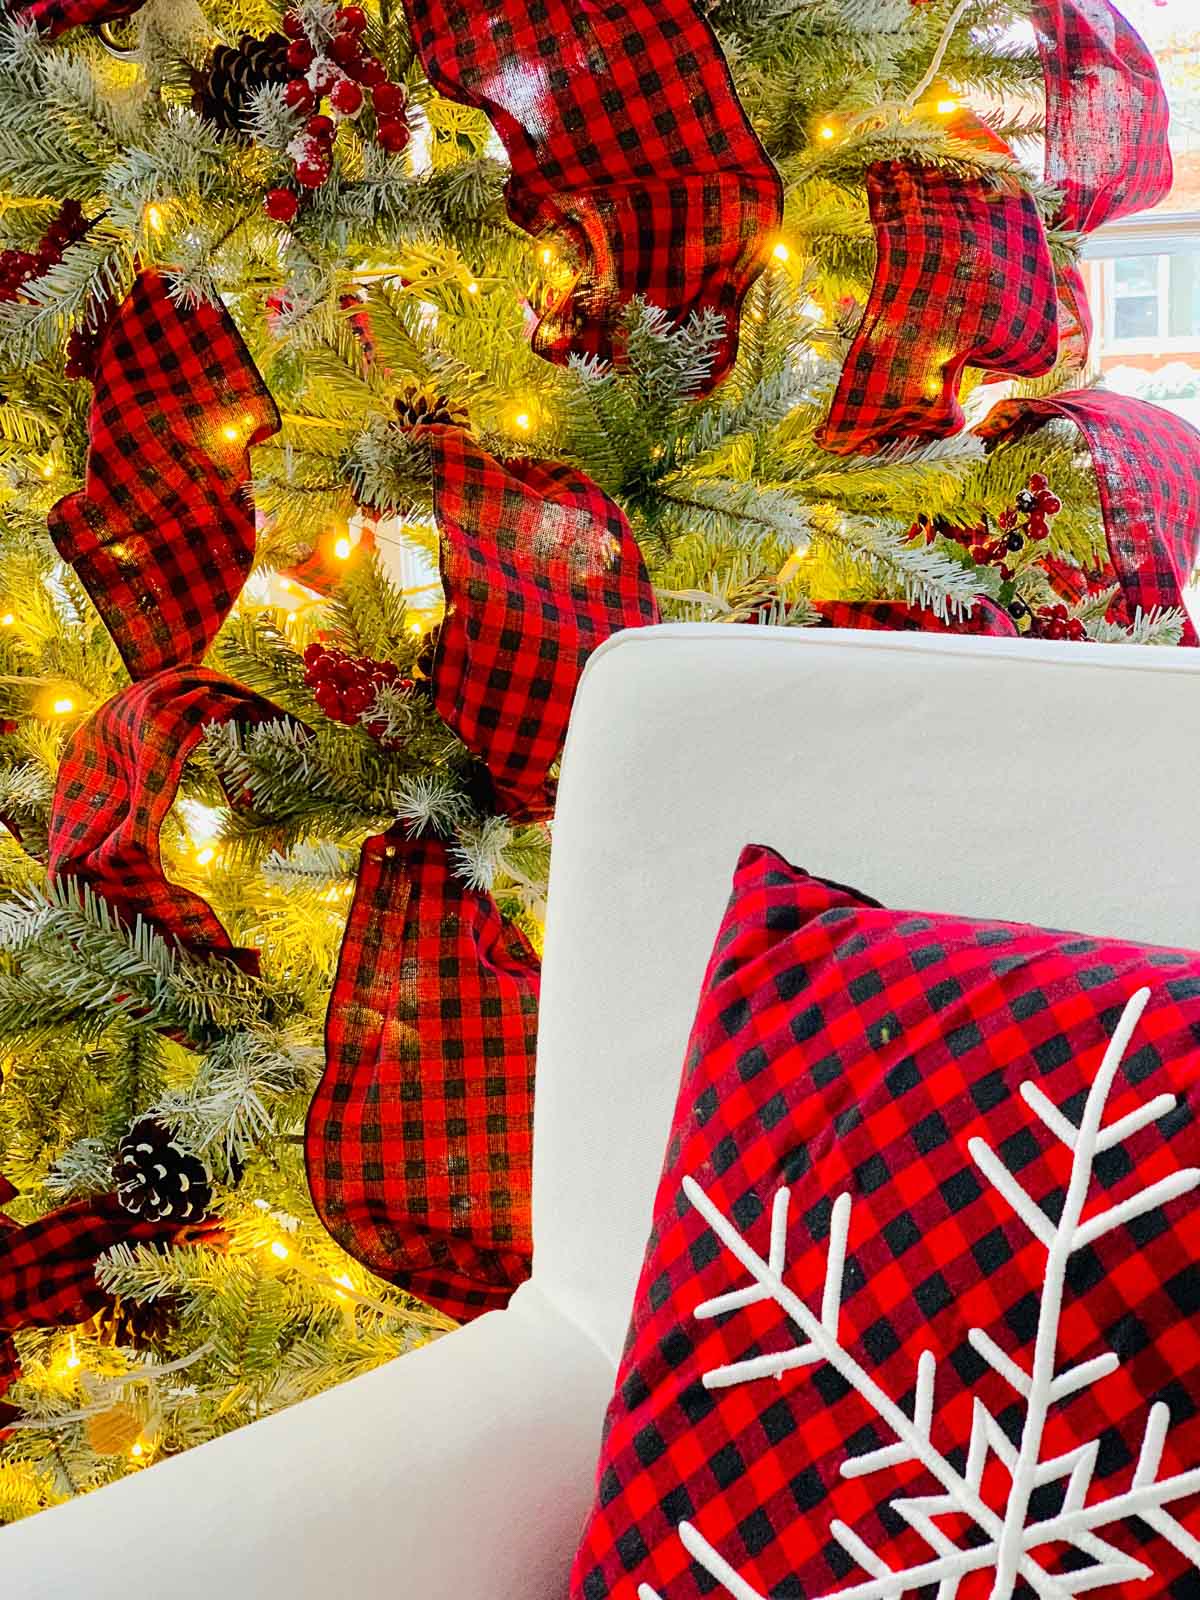 white christmas tree red ribbons white chairs red pillows #christmasdecorating #christmastree